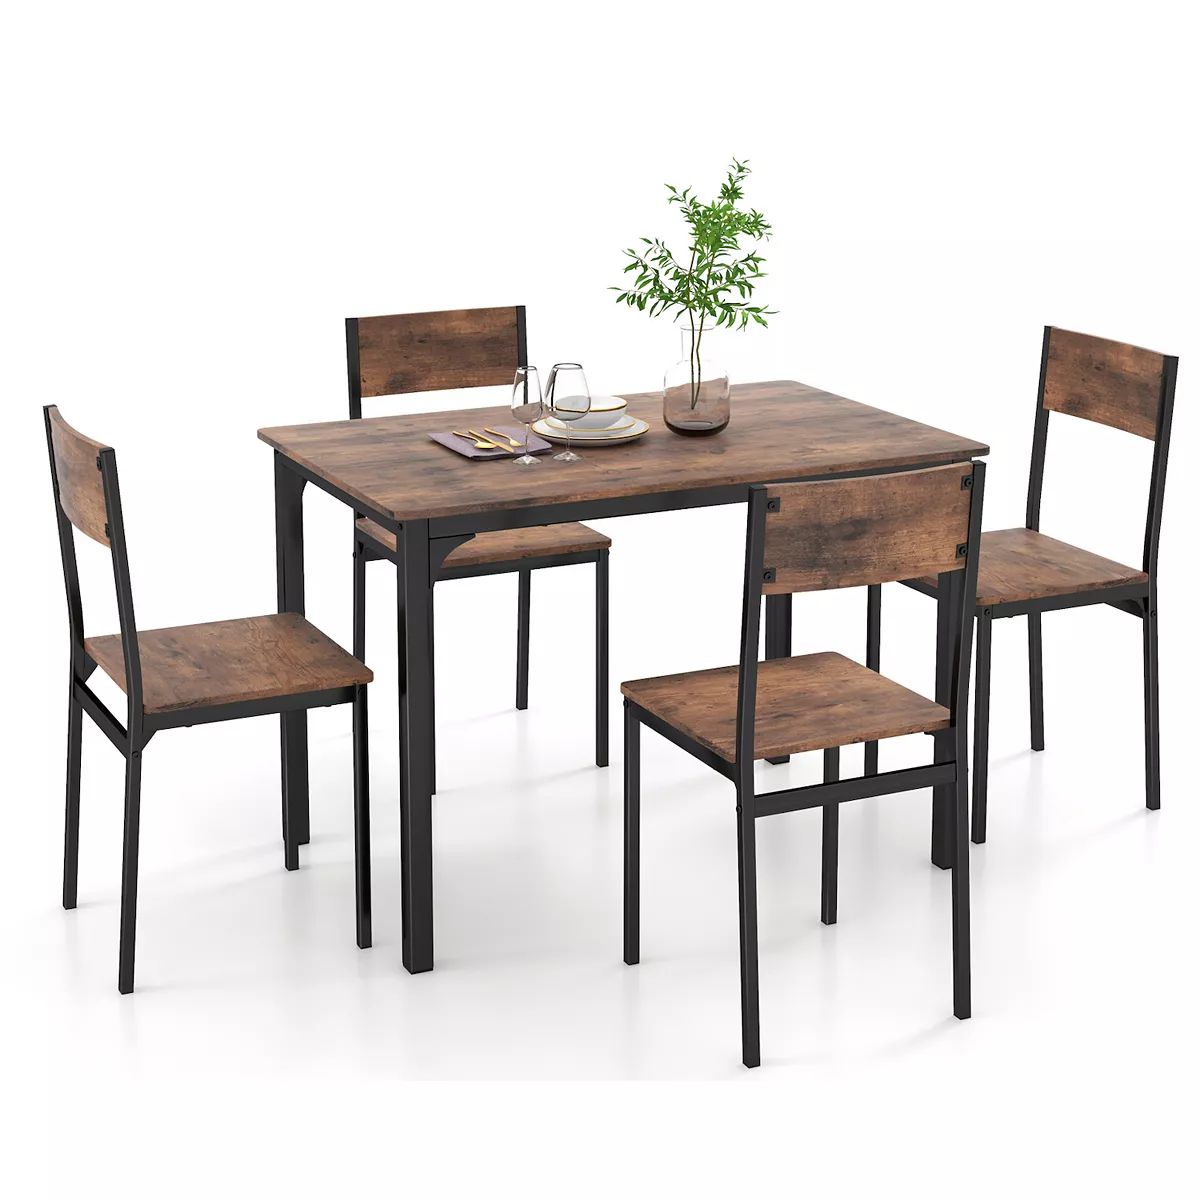 5 Piece Dining Table Set Industrial Style Kitchen Table And Chairs For 4 | Kohl's